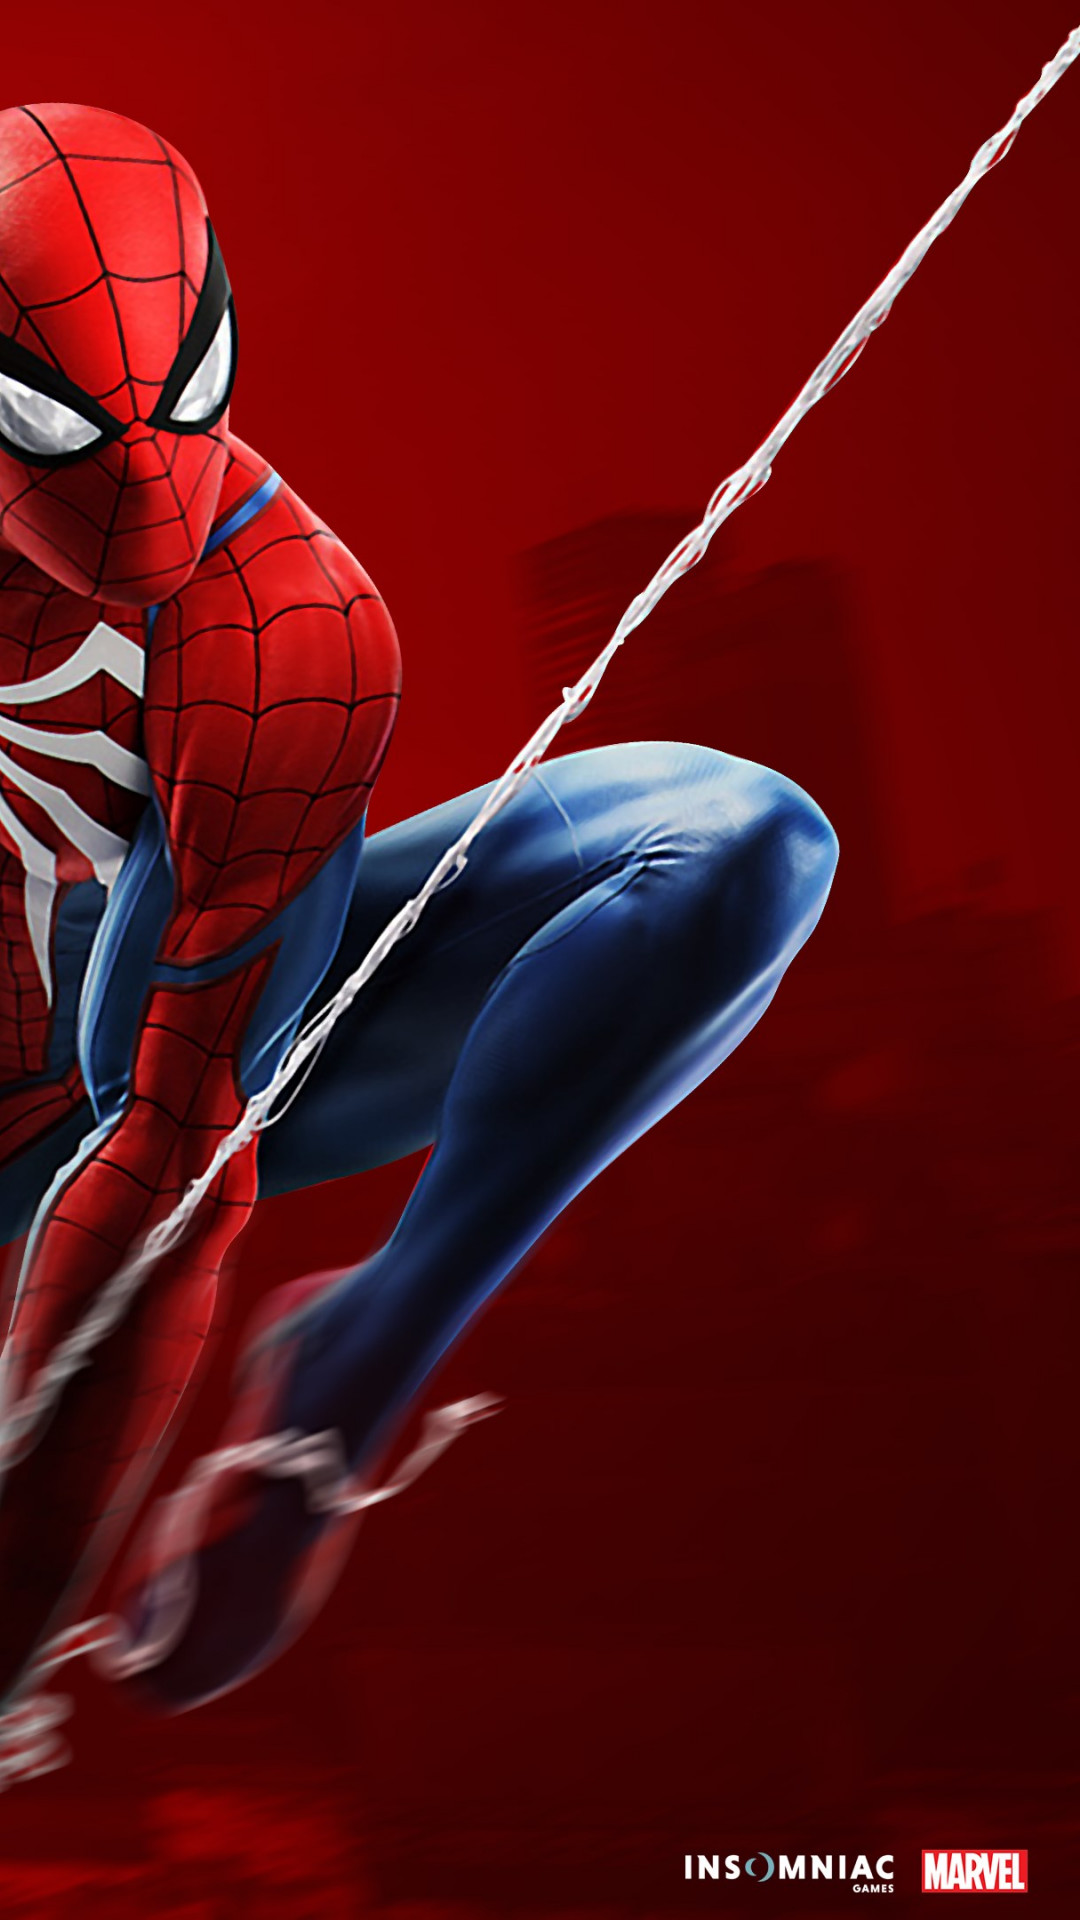 Download wallpaper: Spider Man game on PS4 1080x1920